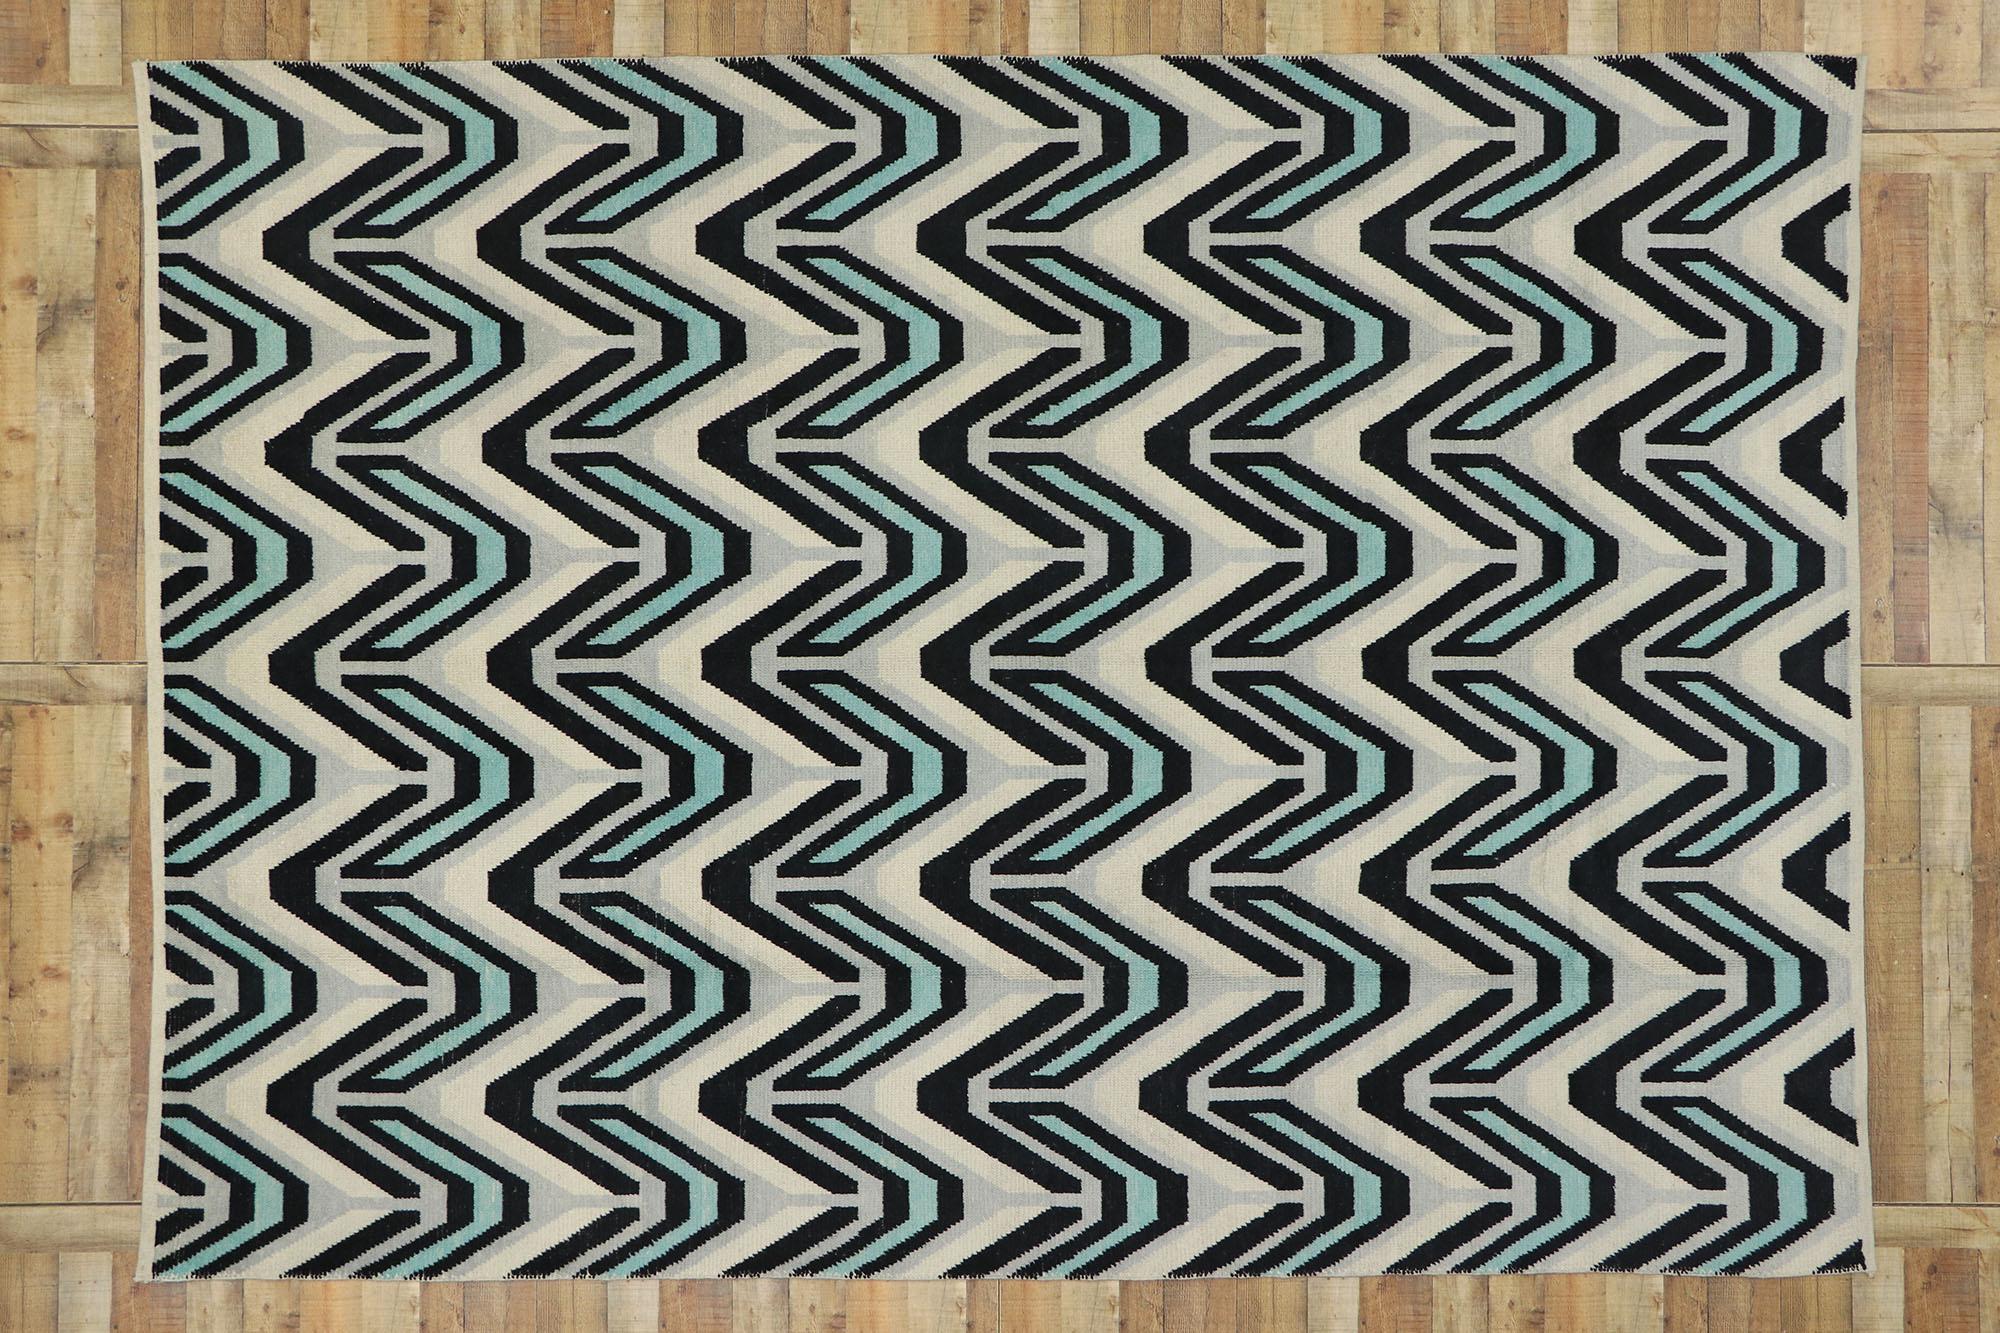 New Contemporary Moroccan Rug with Retro Postmodern Style 1